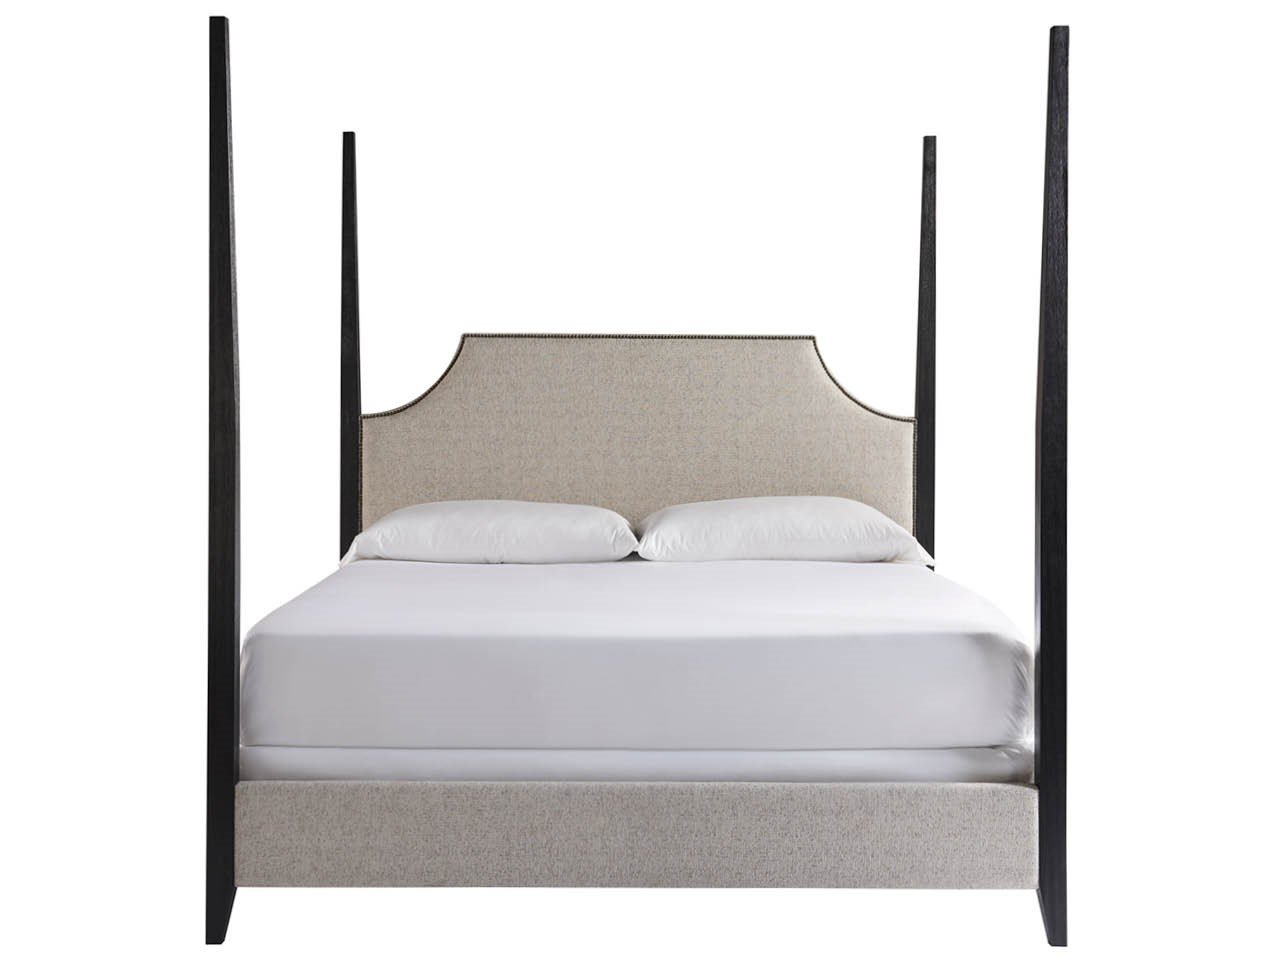 Stanton King Bed